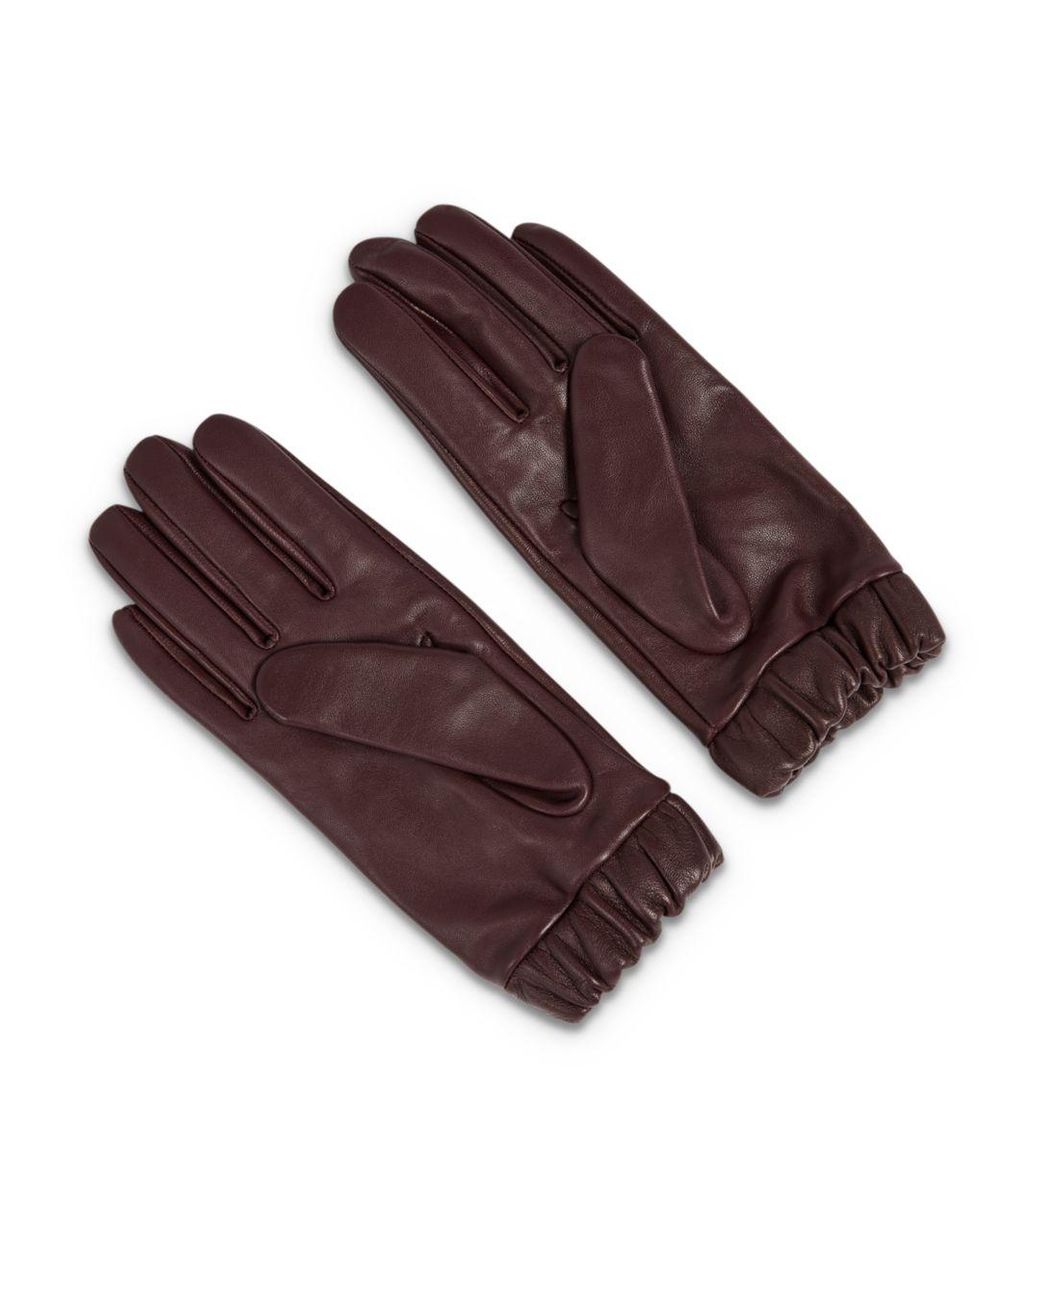 Ted Baker Emilli Ruched Cuff Leather Gloves in Deep Purple (Purple) - Lyst